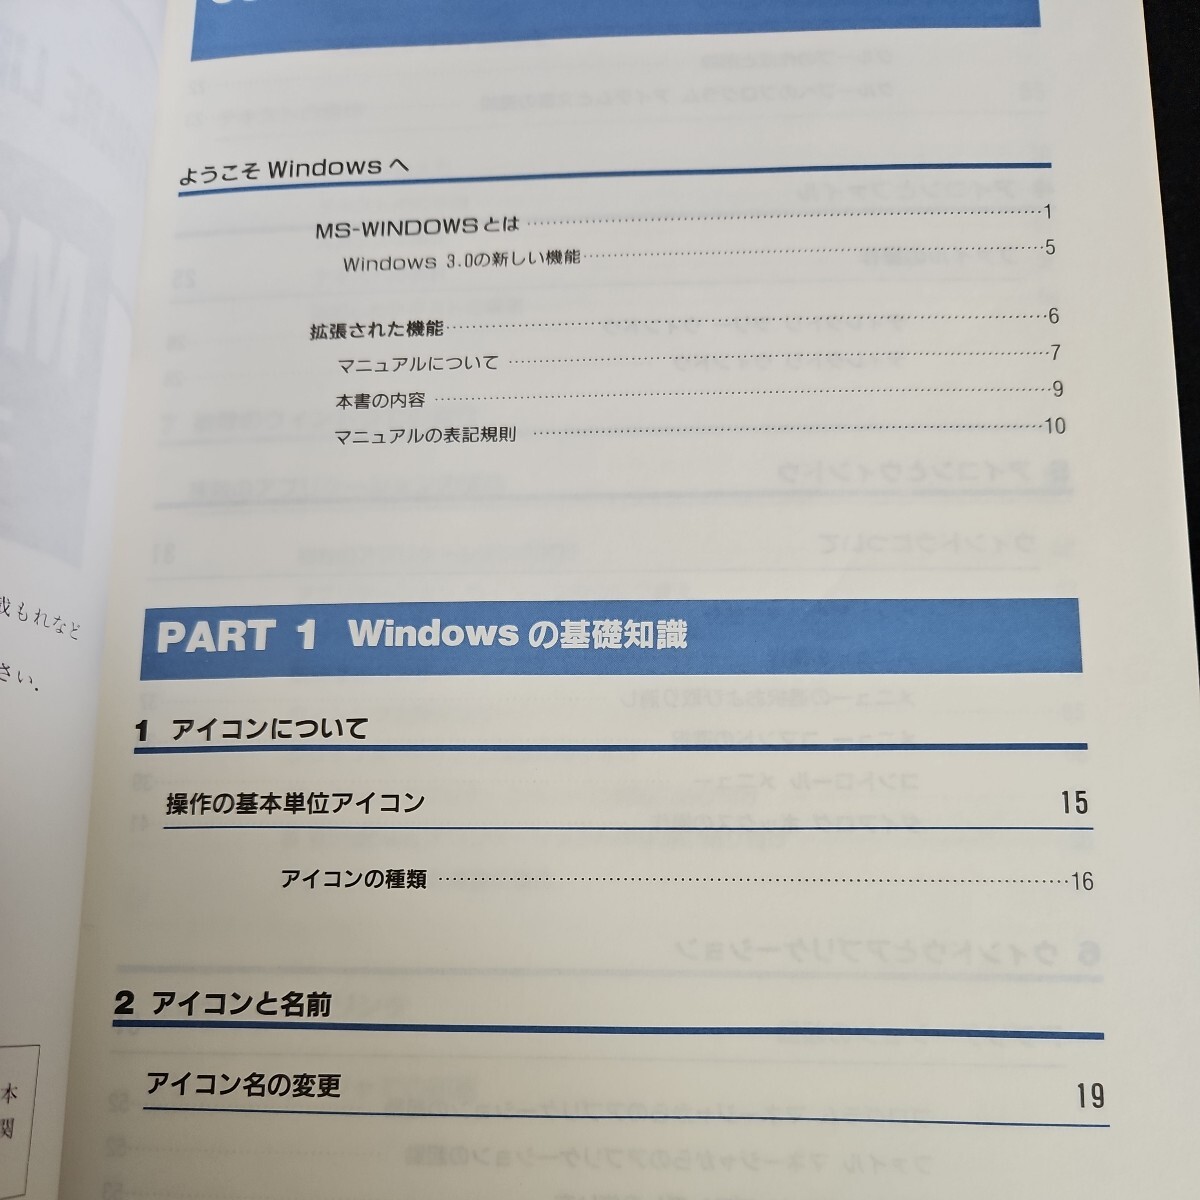 i44-032 NEC personal computer PC-9800 series NEC SOFTWARE LIBRARY MS-WINDOWS 3.0 user z reference manual 